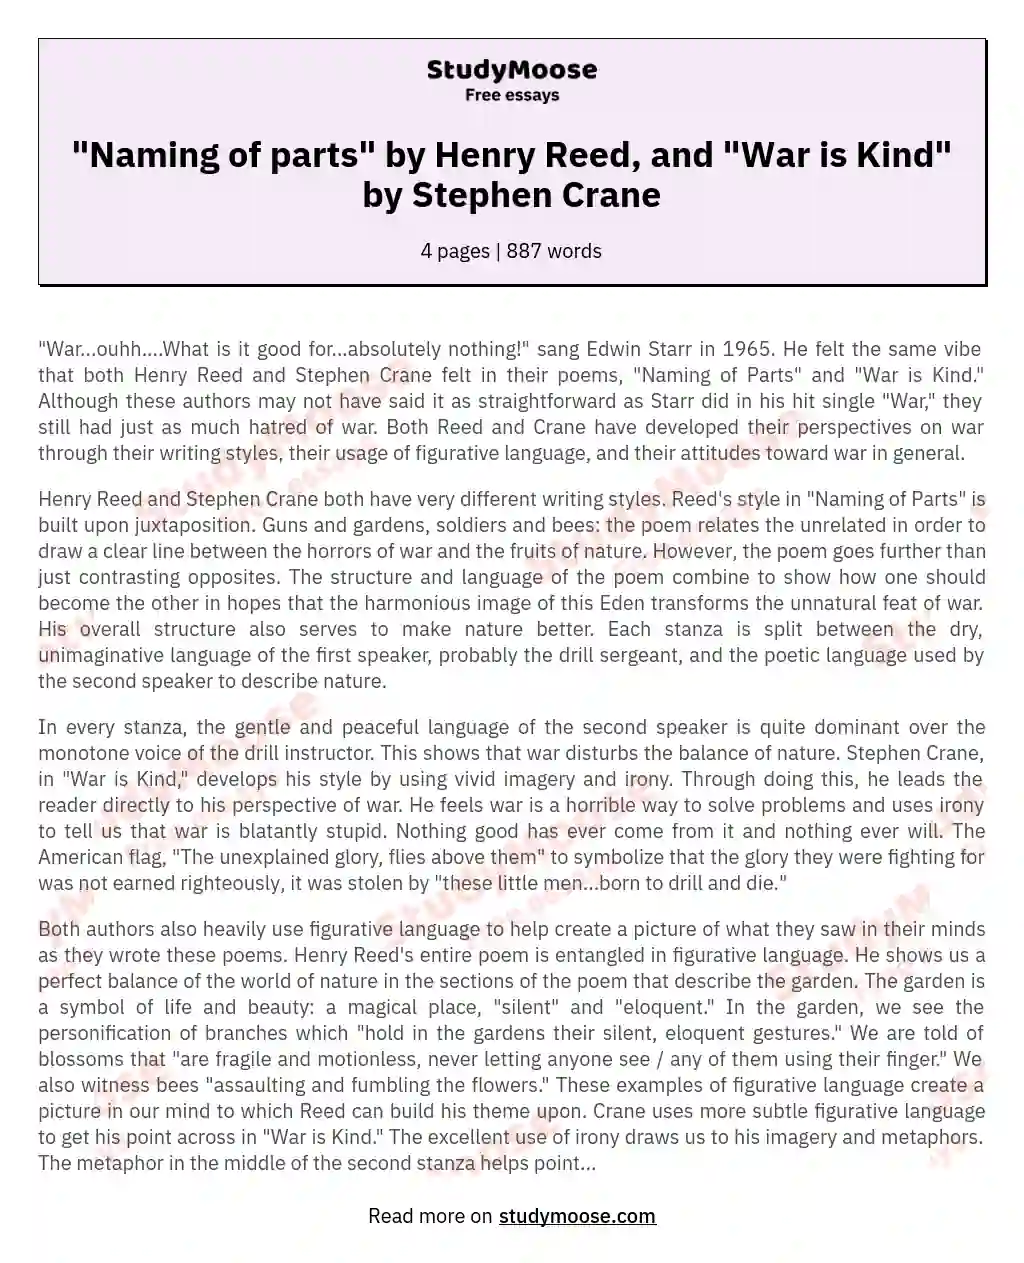 "Naming of parts" by Henry Reed, and "War is Kind" by Stephen Crane